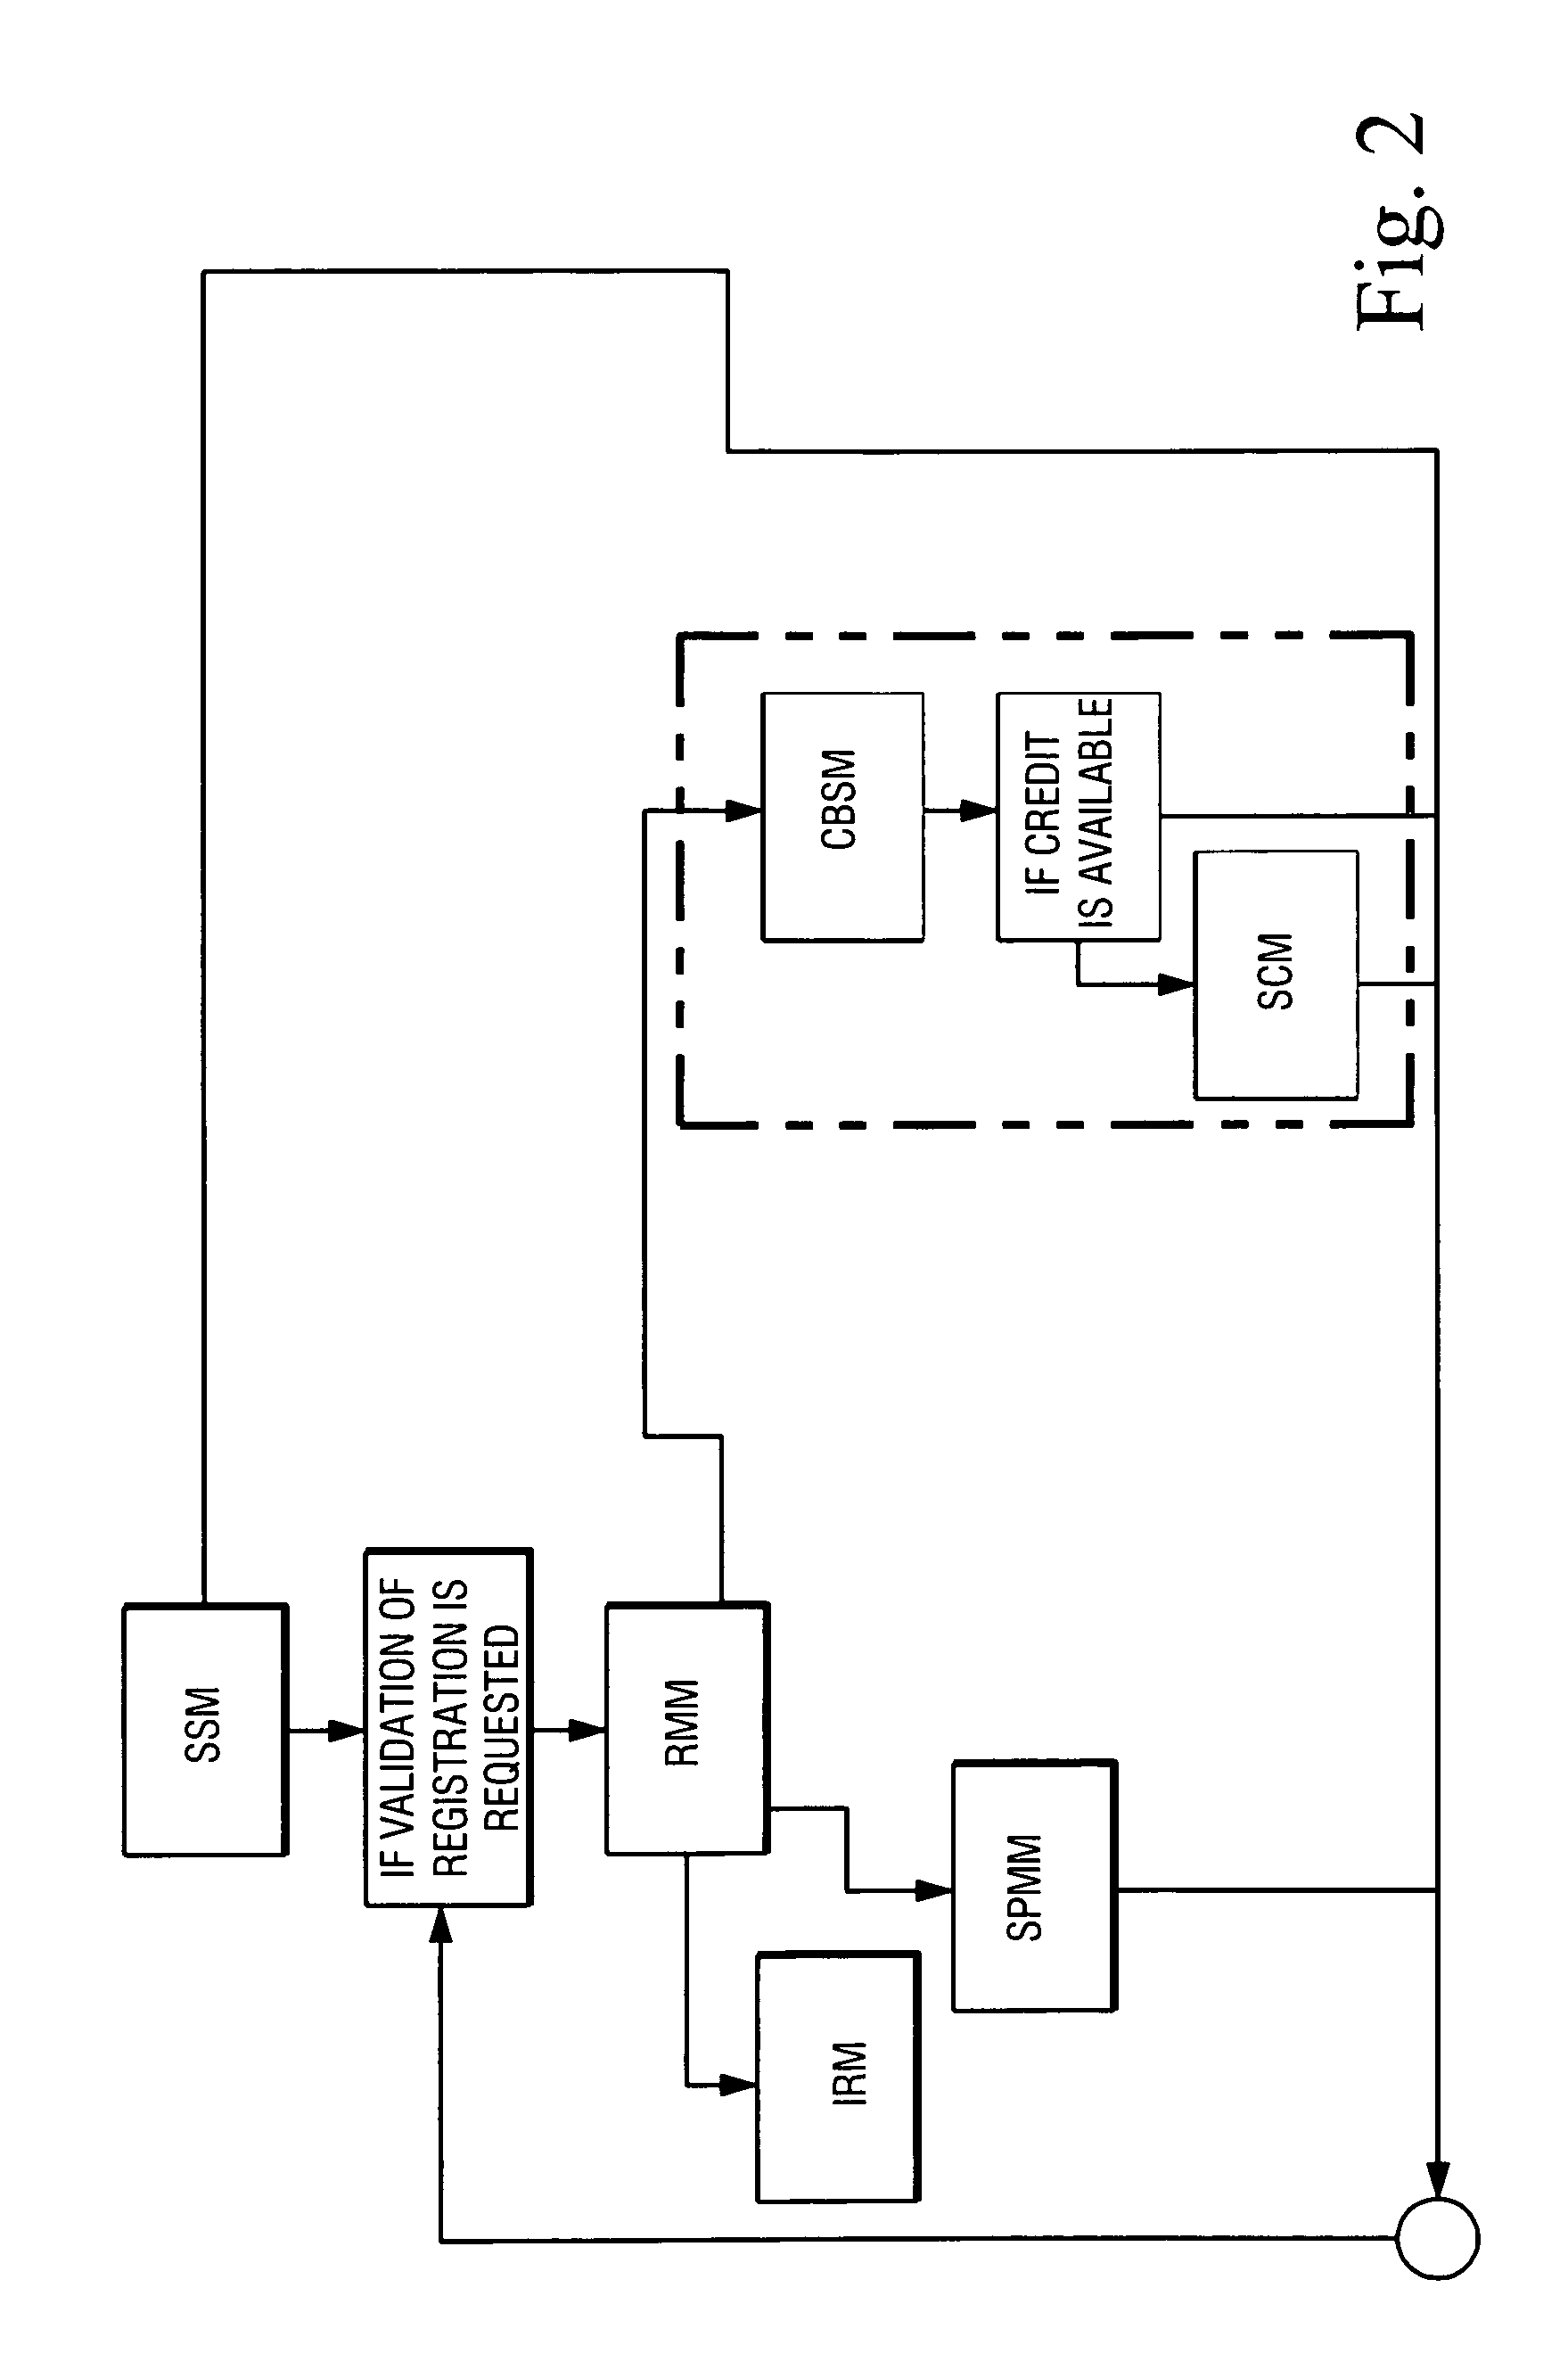 Process for selecting a recording on a digital audiovisual reproduction system, and system for implementing the process